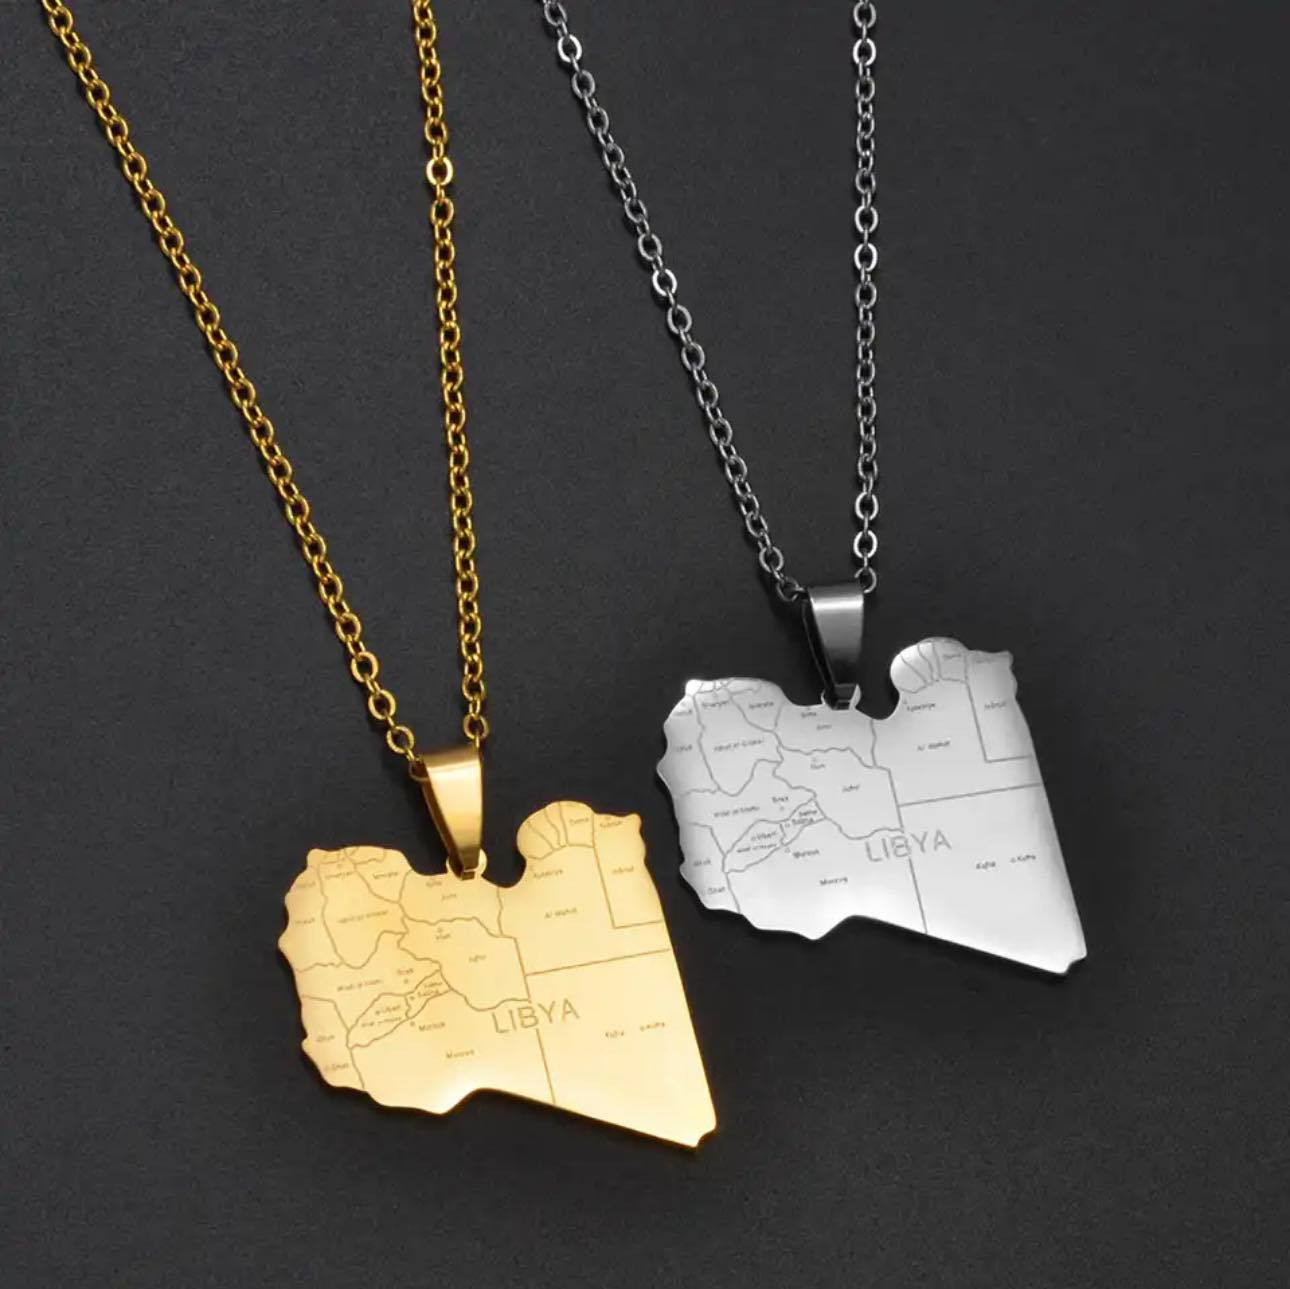 Libya Map & Cities Necklace